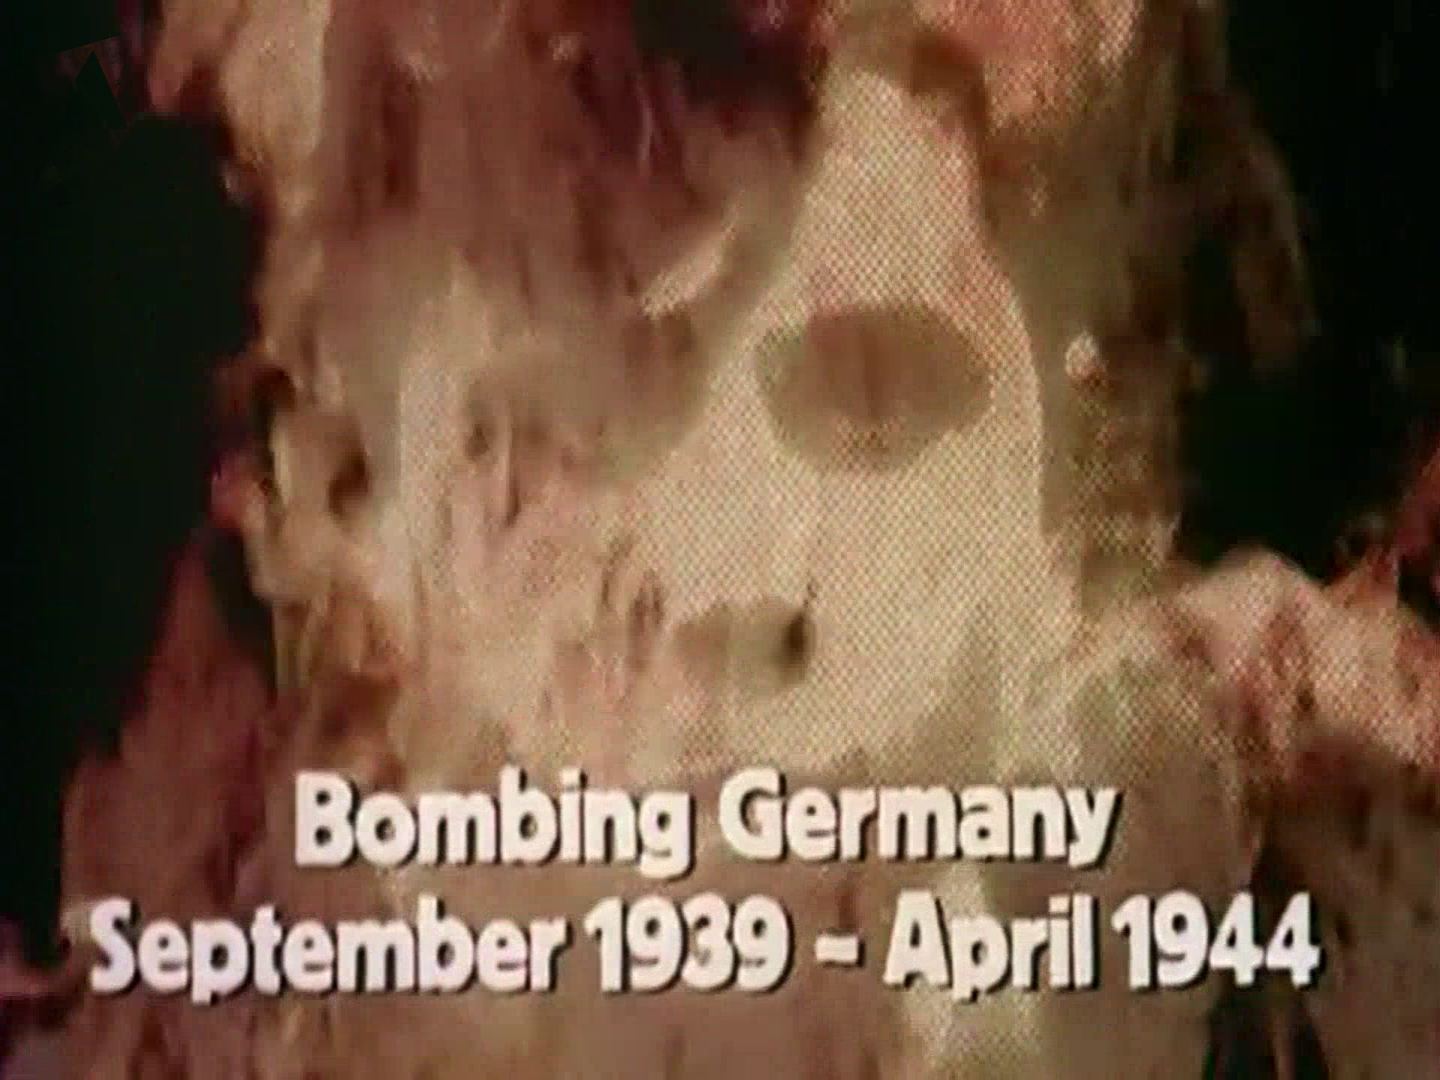 Main title from the 1974 ‘Whirlwind’ episode of The World at War (1973-74) (2). Bombing Germany September 1939 – April 1944